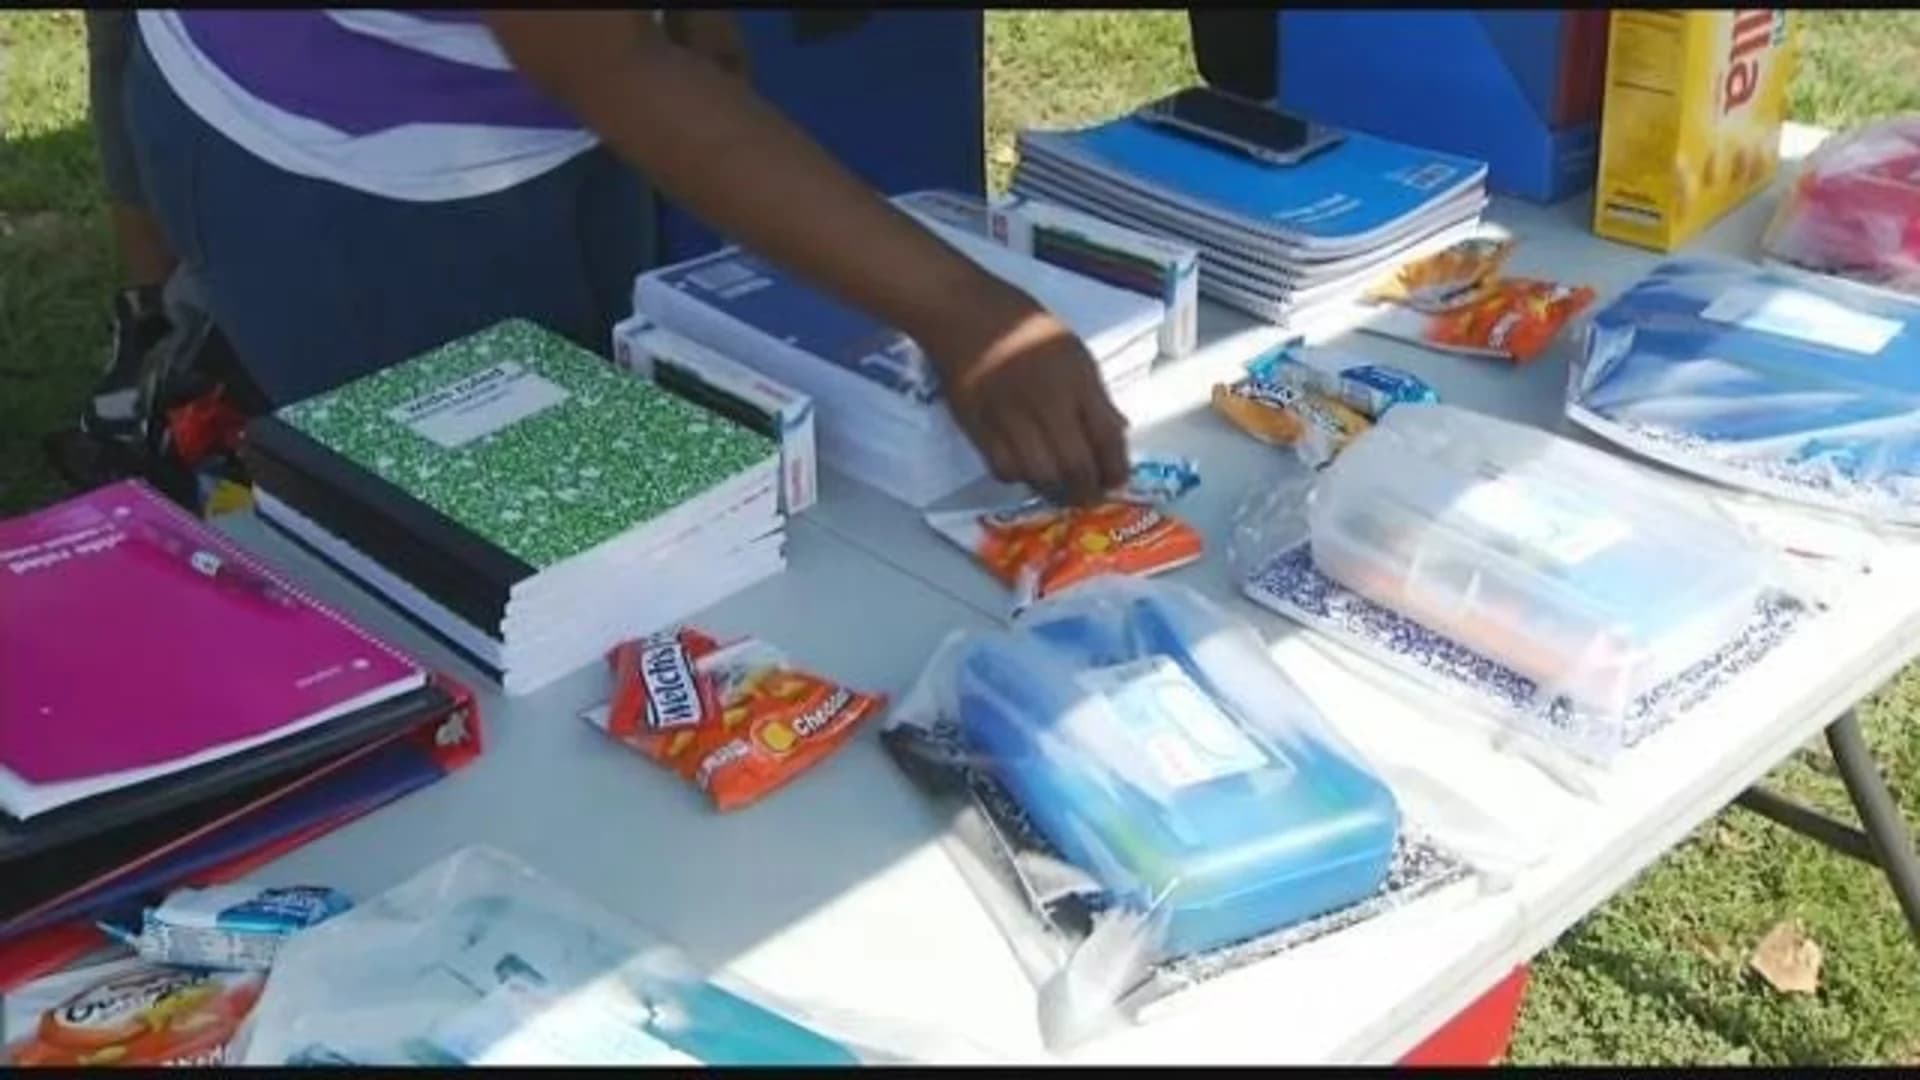 Crotona Park plays host to back-to-school barbecue